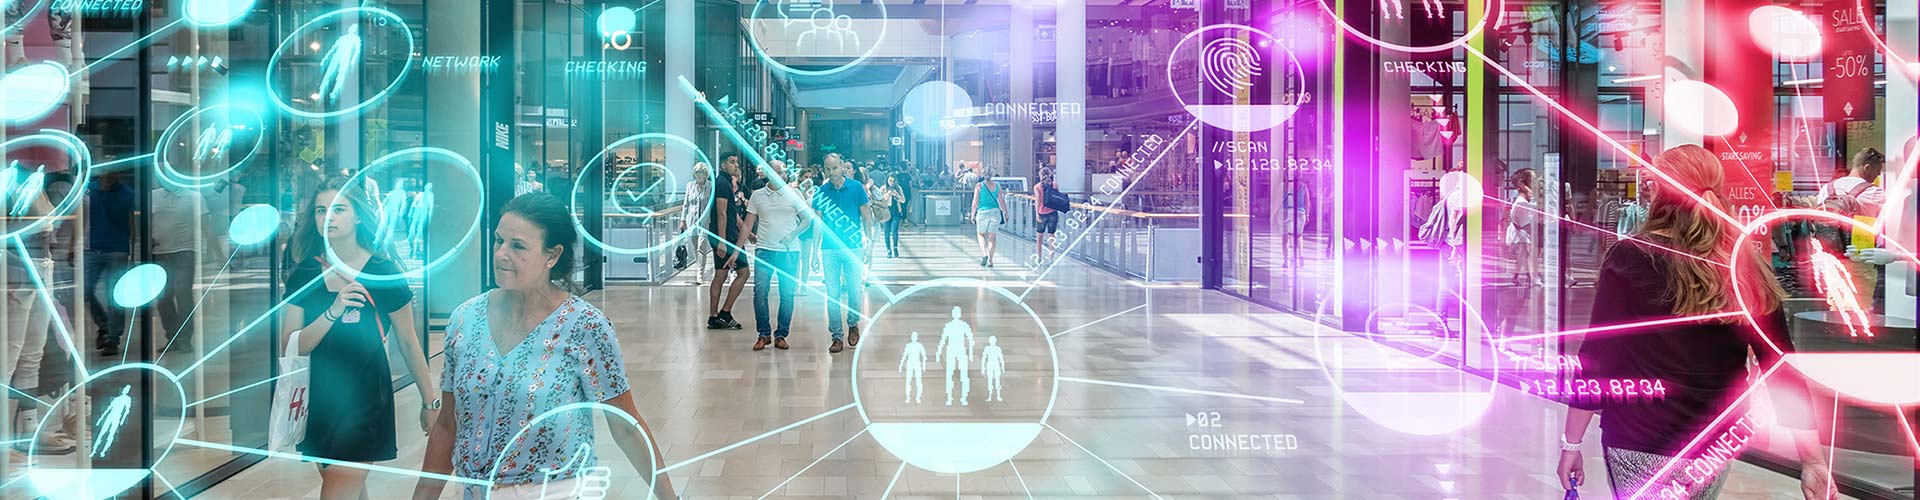 Digital connections overlaid on shoppers at the mall banner